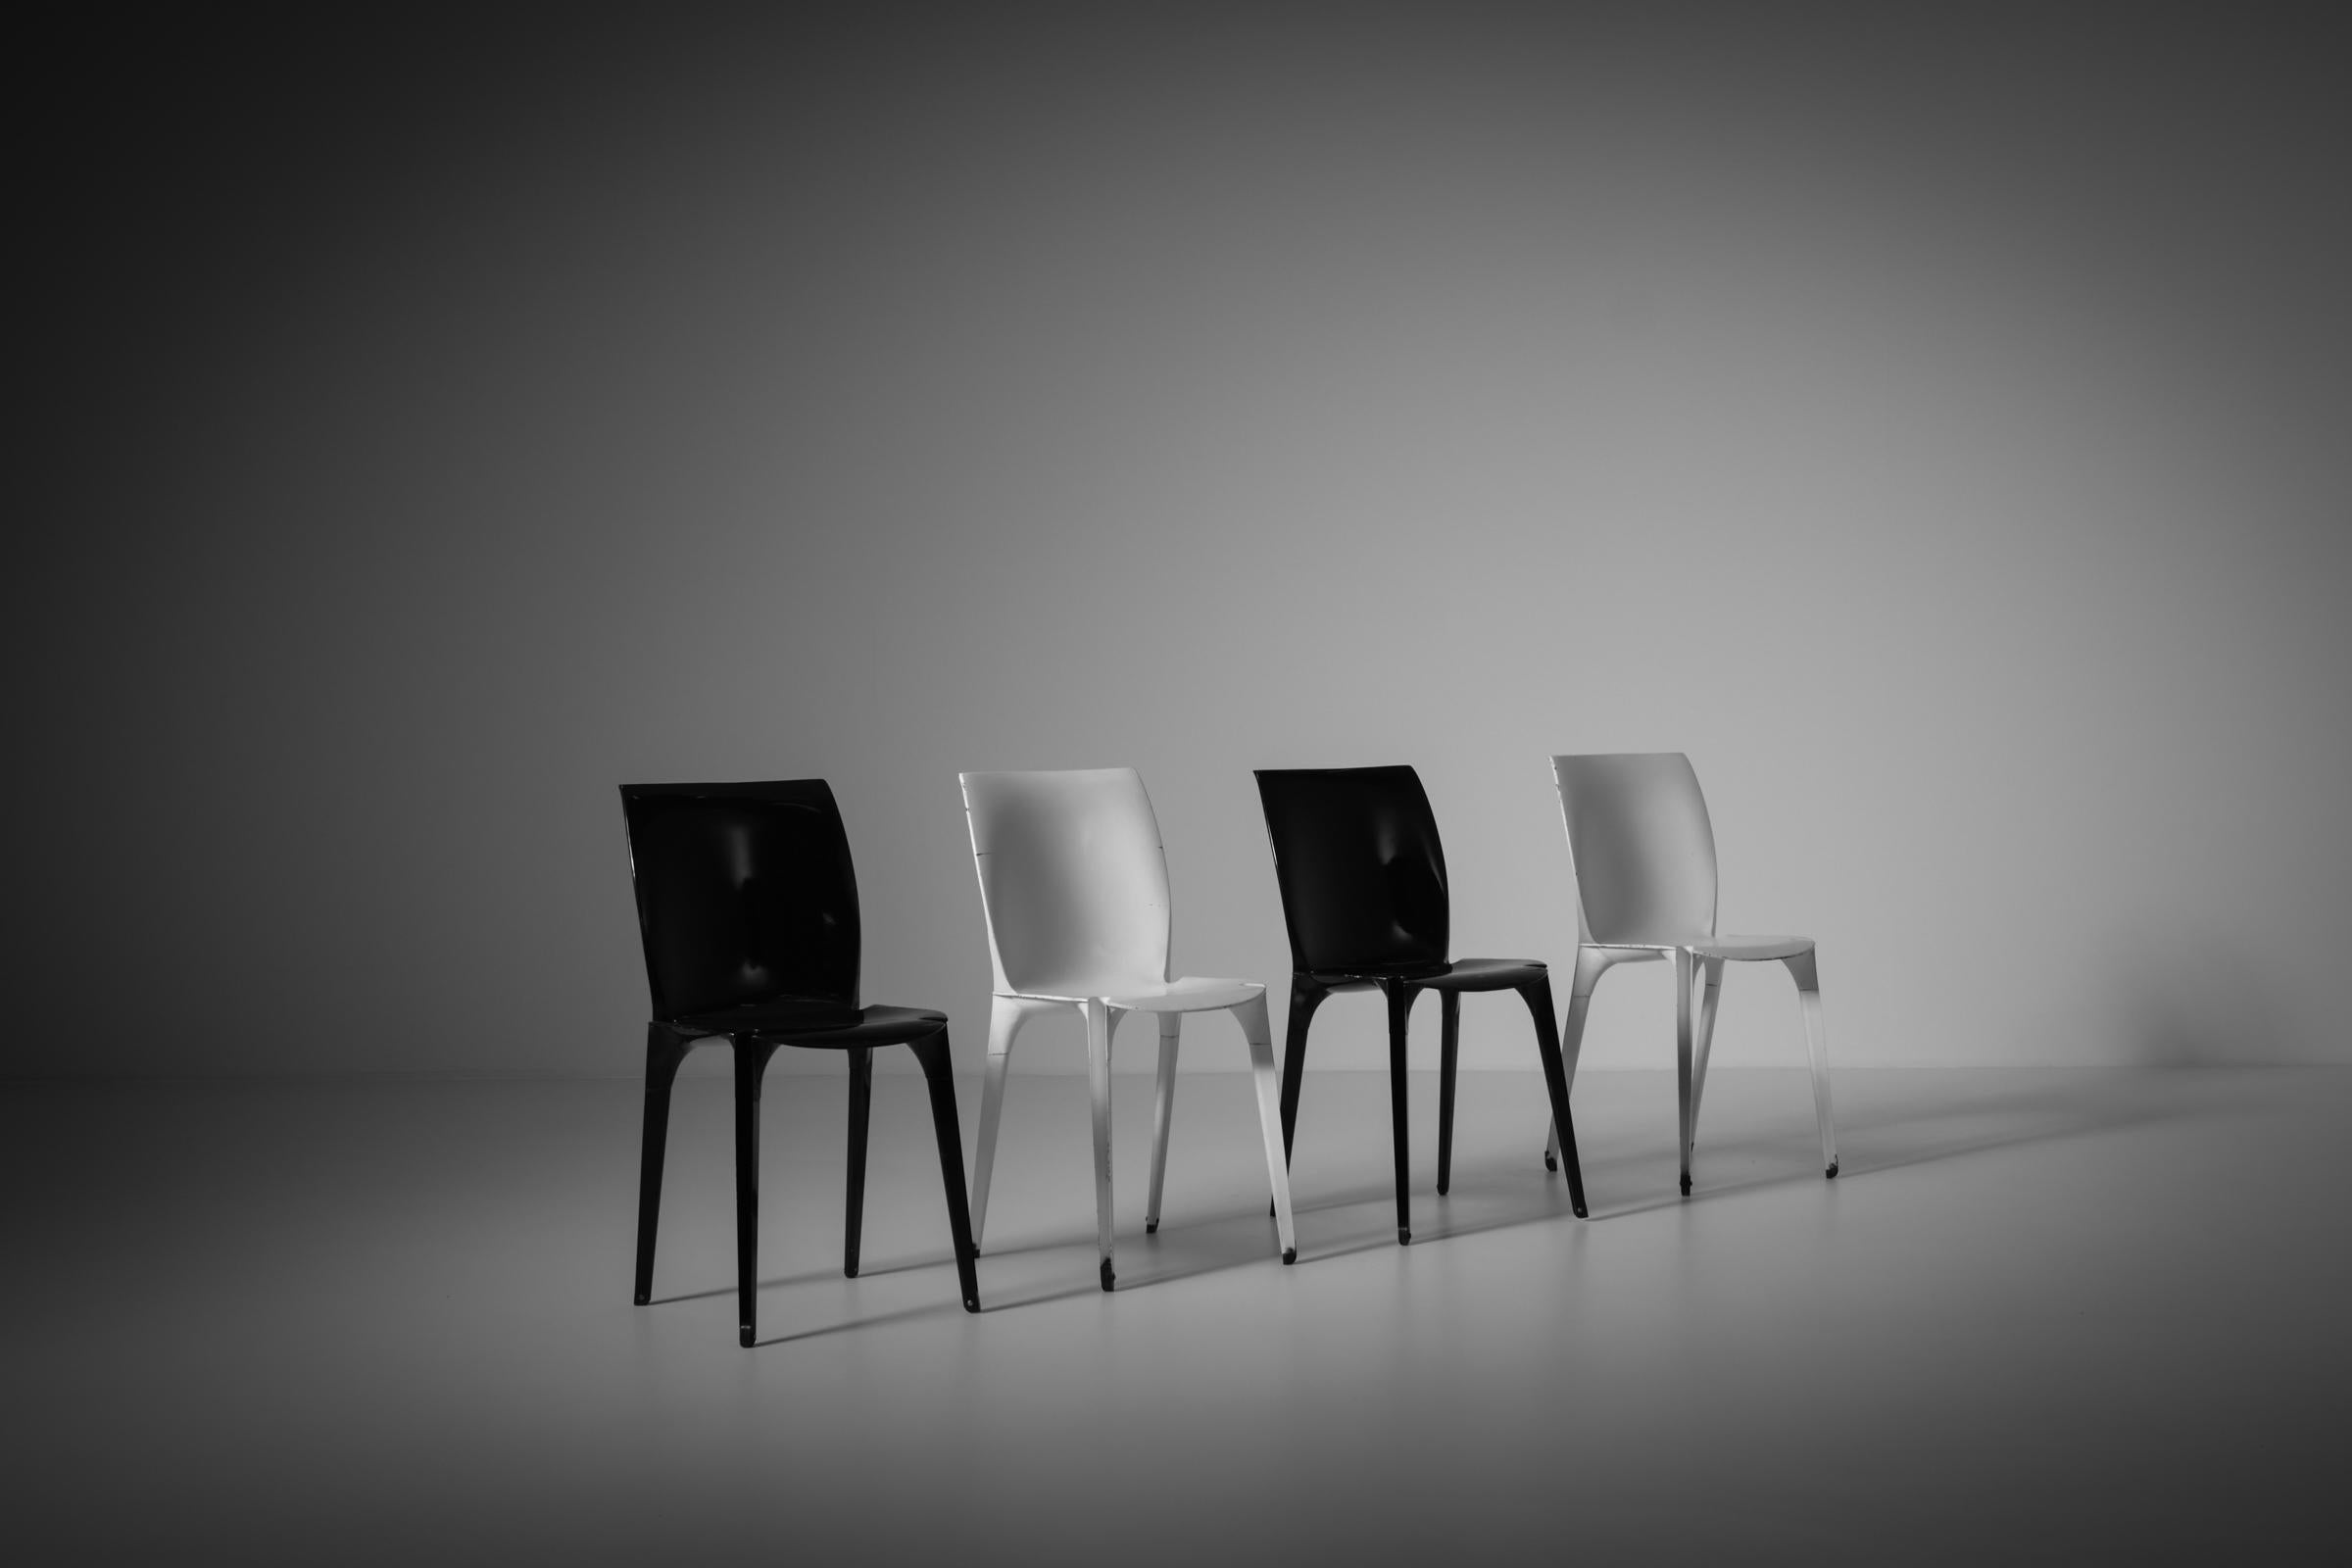 Set of four Lambda chairs by Richard Sapper and Marco Zanuso for Gavina, Italy 1959. Industrial and revolutionary design made from stamped and enameled metal and rubber feet. The technique to stamp and shape the metal comes from the car industry